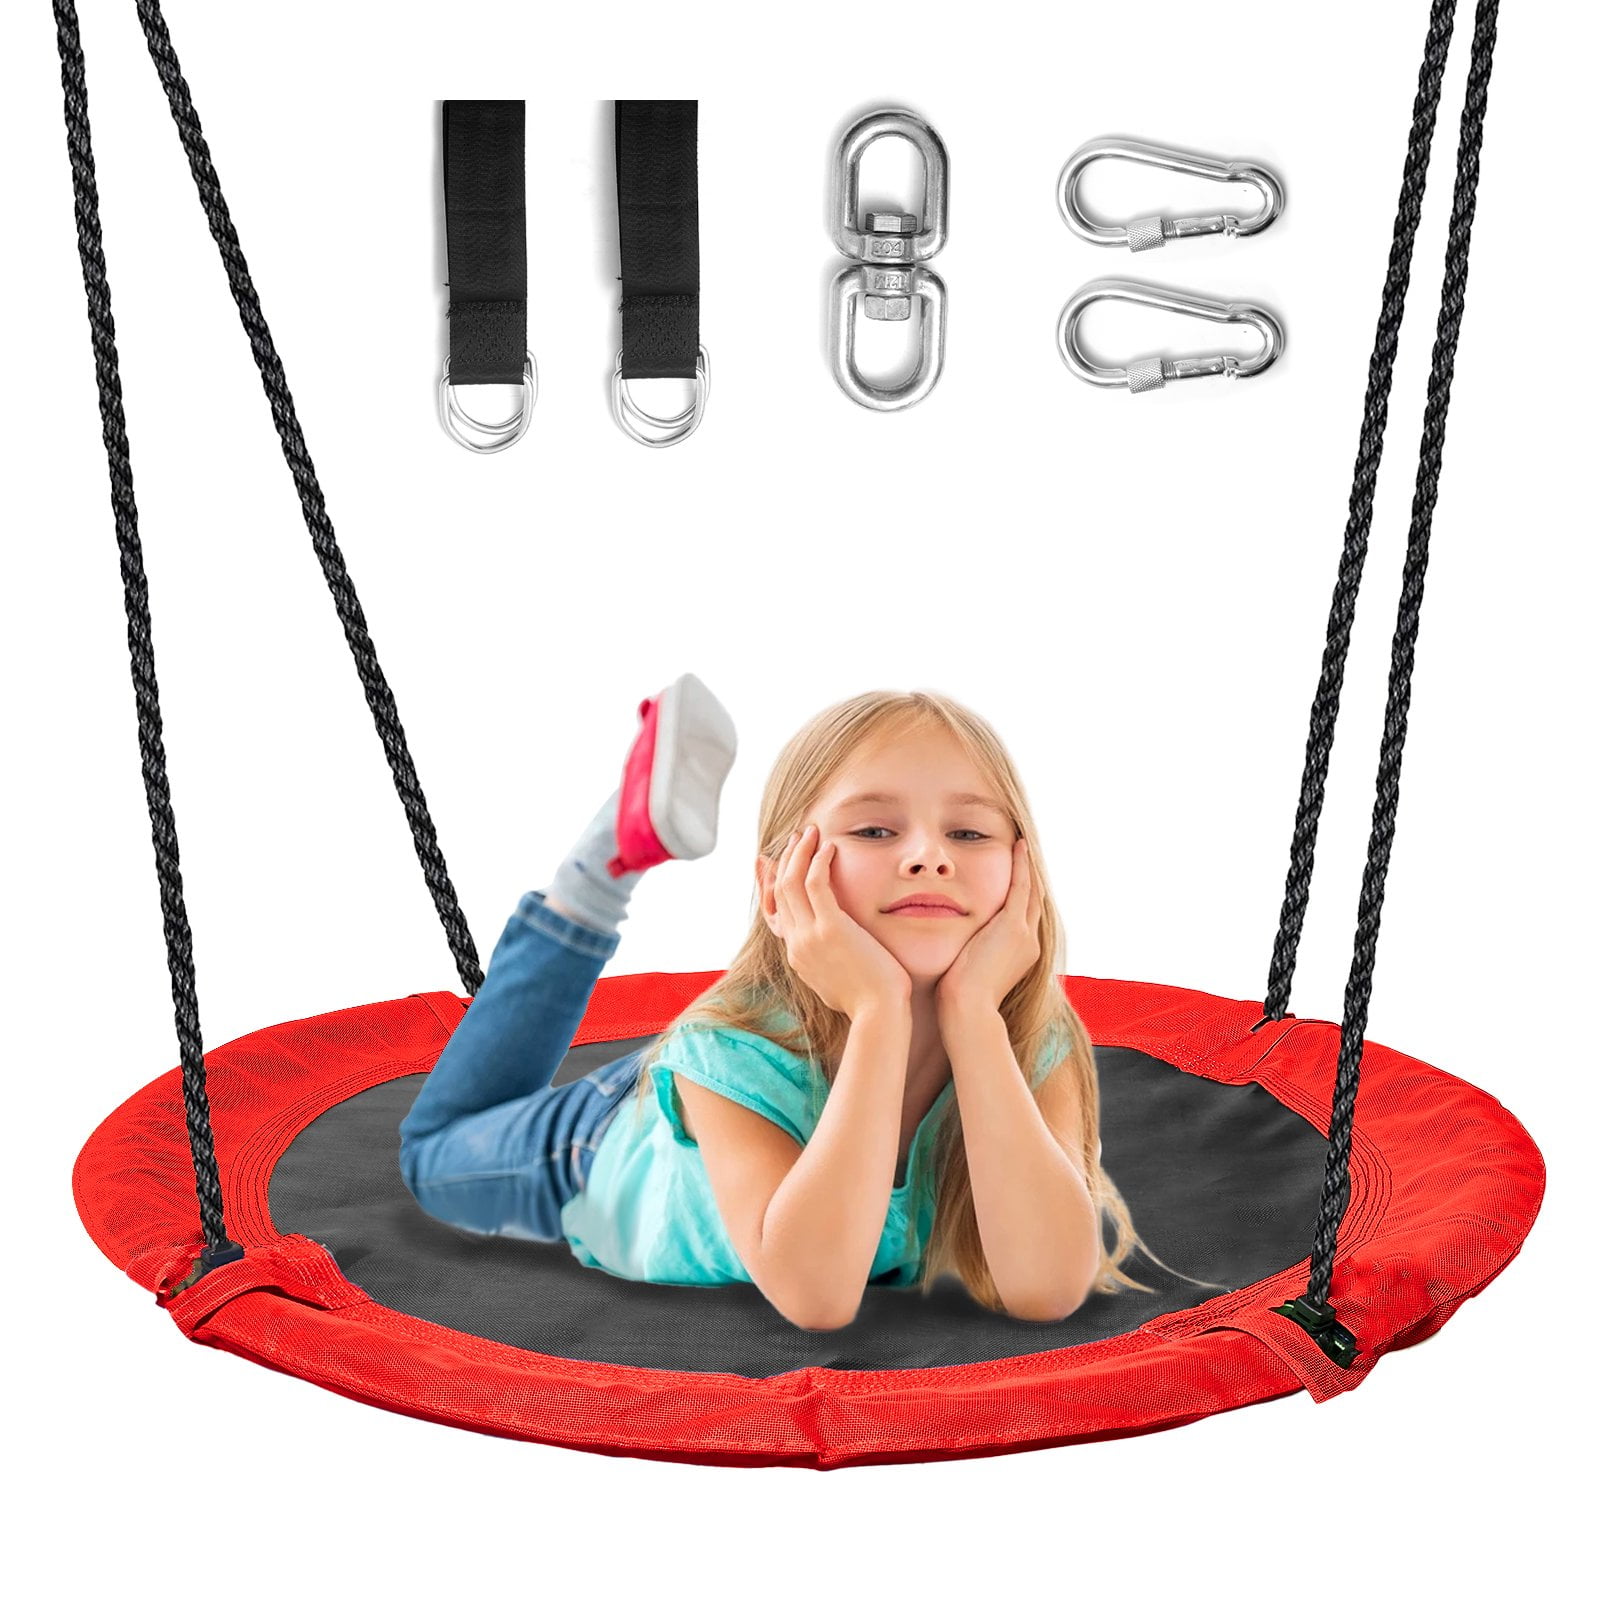 40 Inch Saucer Tree Swing Set for Kids Outdoor 700 lb Weight Capacity and Adjustable Multi-Strand Ropes Safe and Sturdy Waterproof Swing for Children Tree Park Backyard Multicolor 